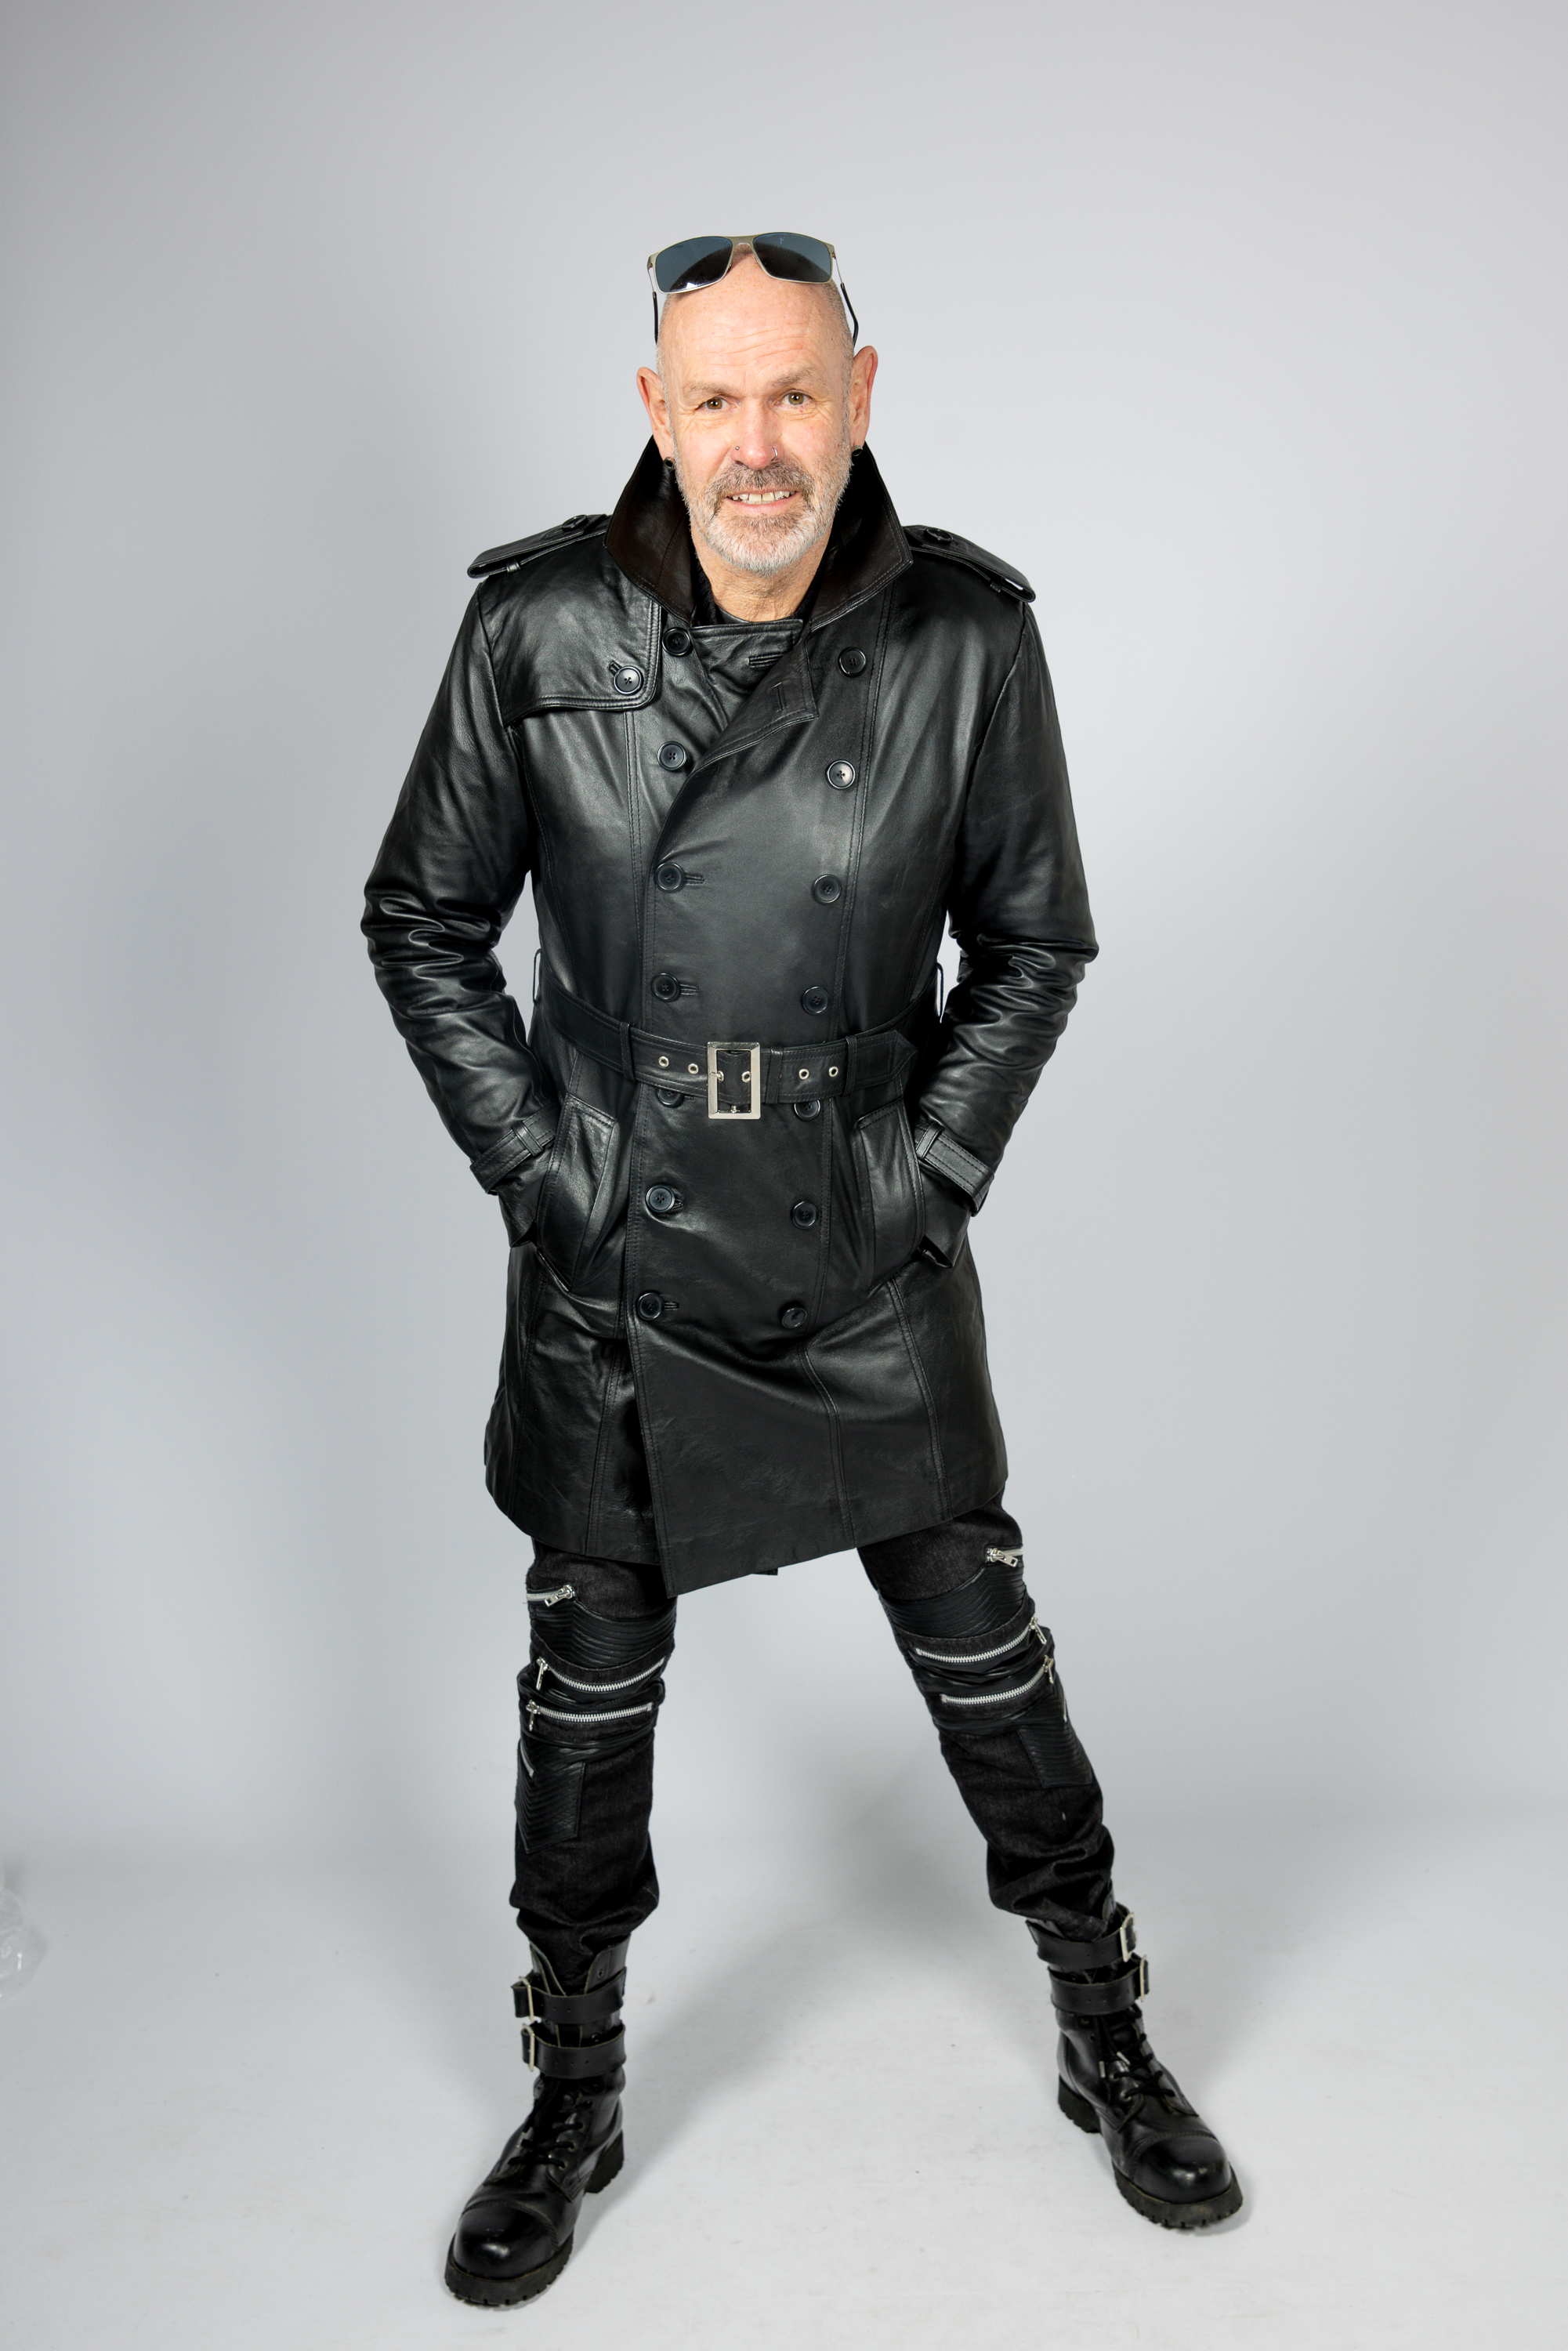 Trench coat as genuine leather leather coat black for men